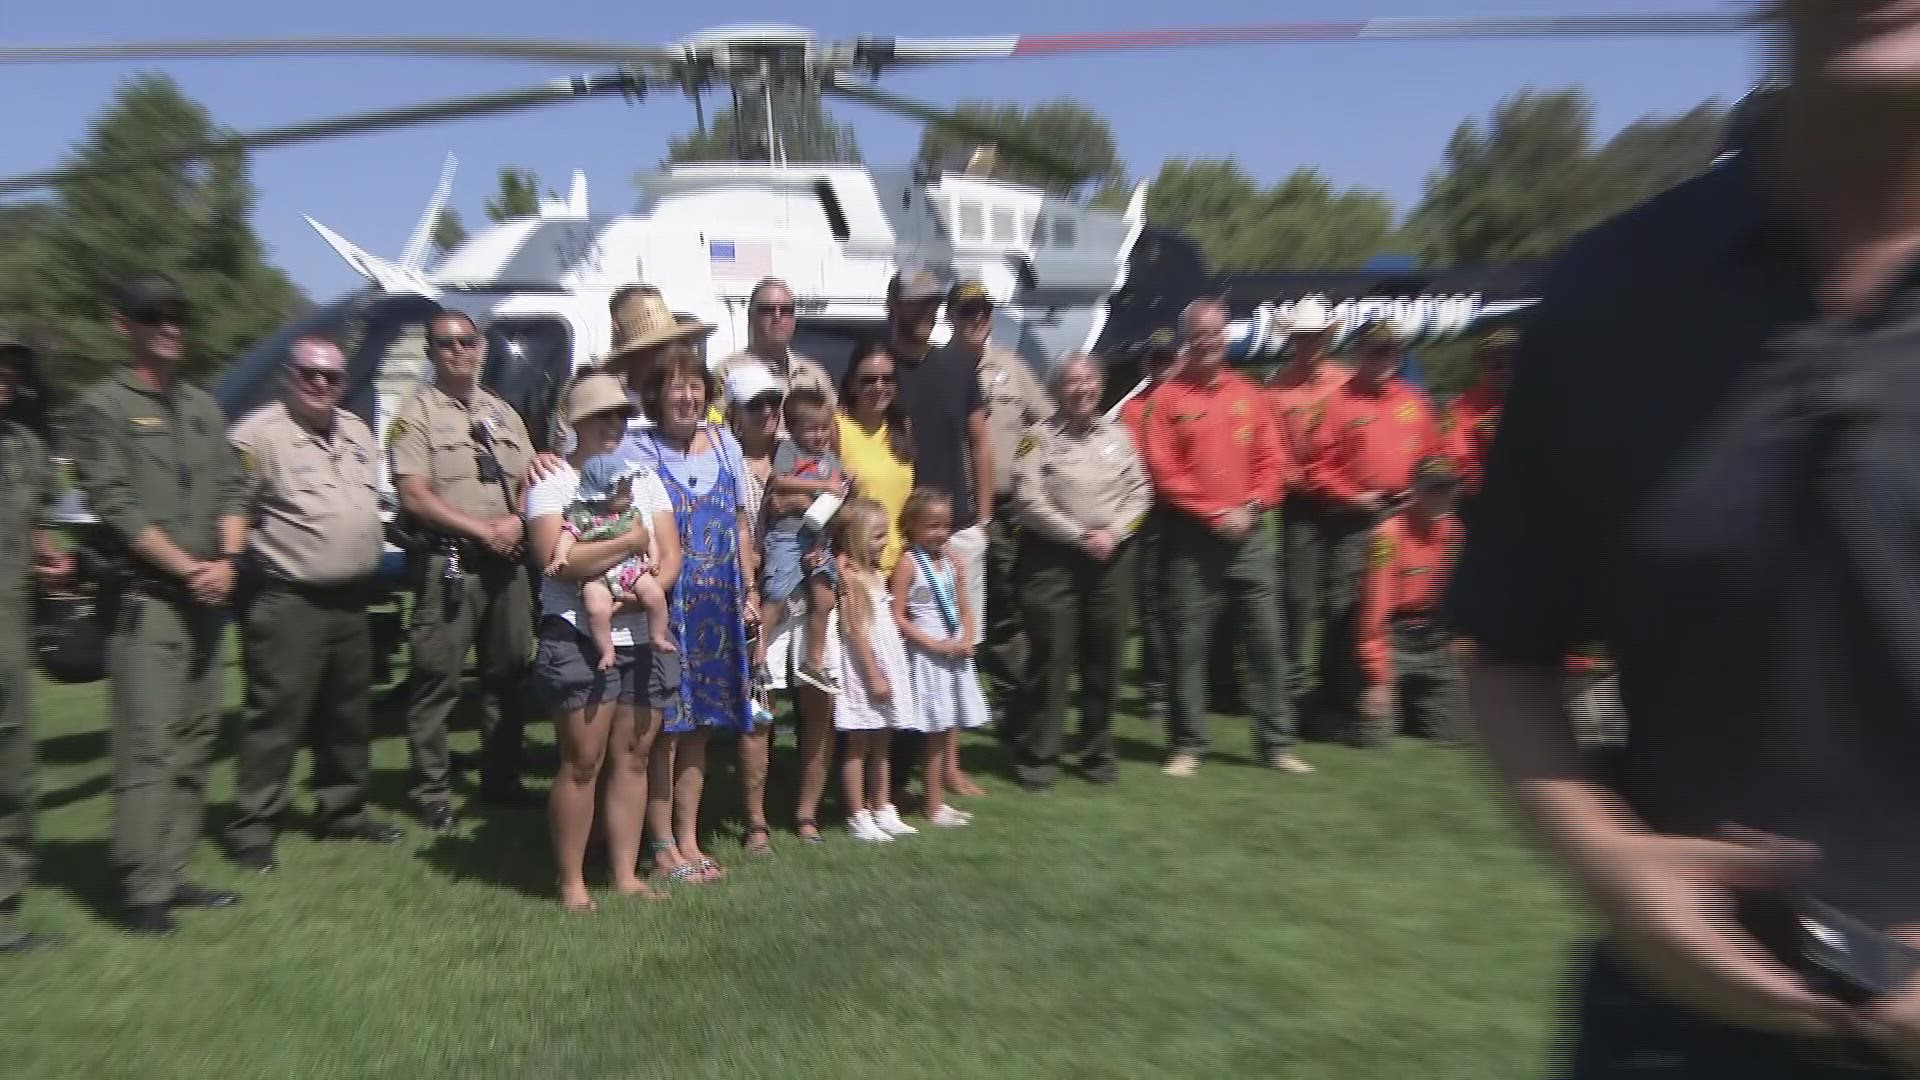 6-year-old girl rescues 71-year-old man lost with Alzheimer's in Ramona.  Sheriff's Department awards the girl a Medal of Distinguished Service.